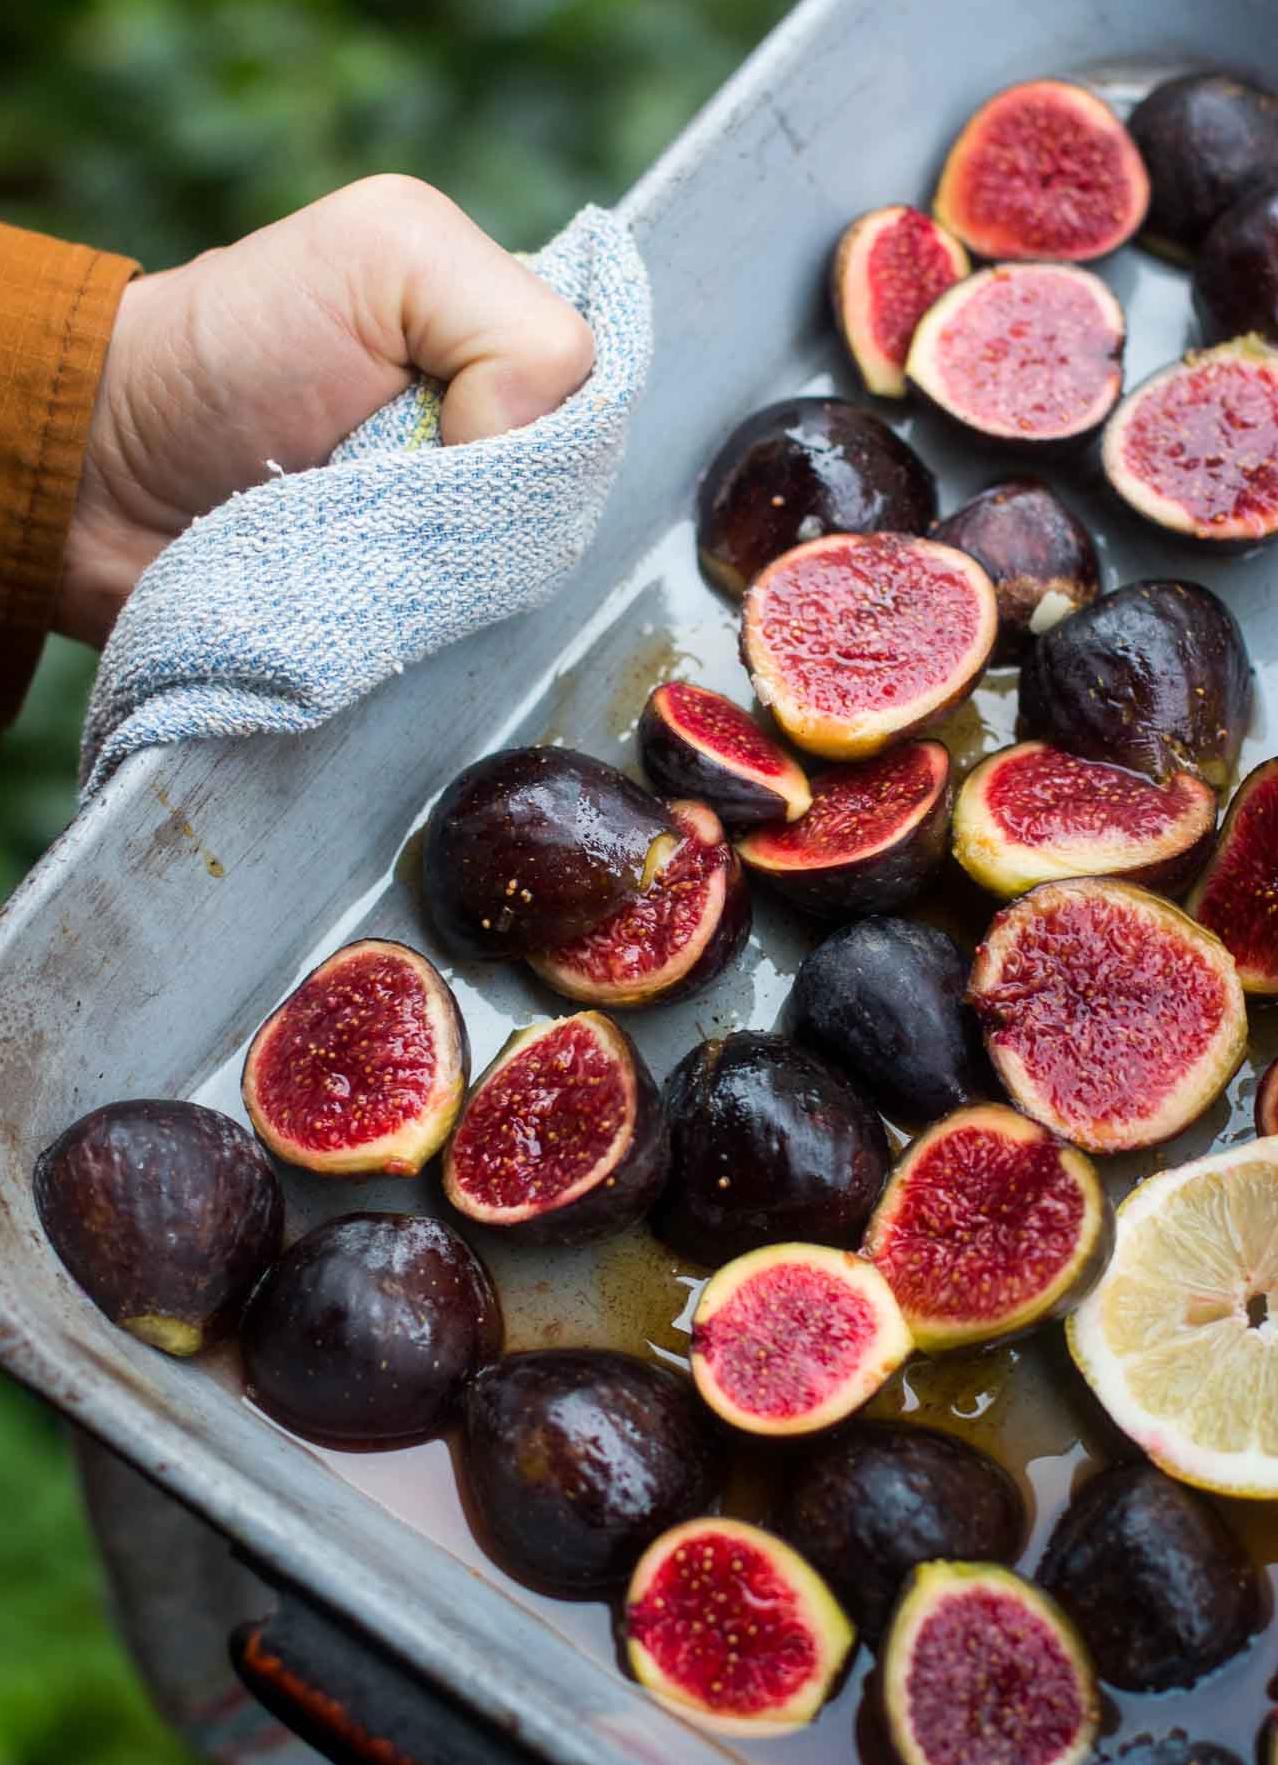  These baked figs are juicy, boozy, and utterly delicious.